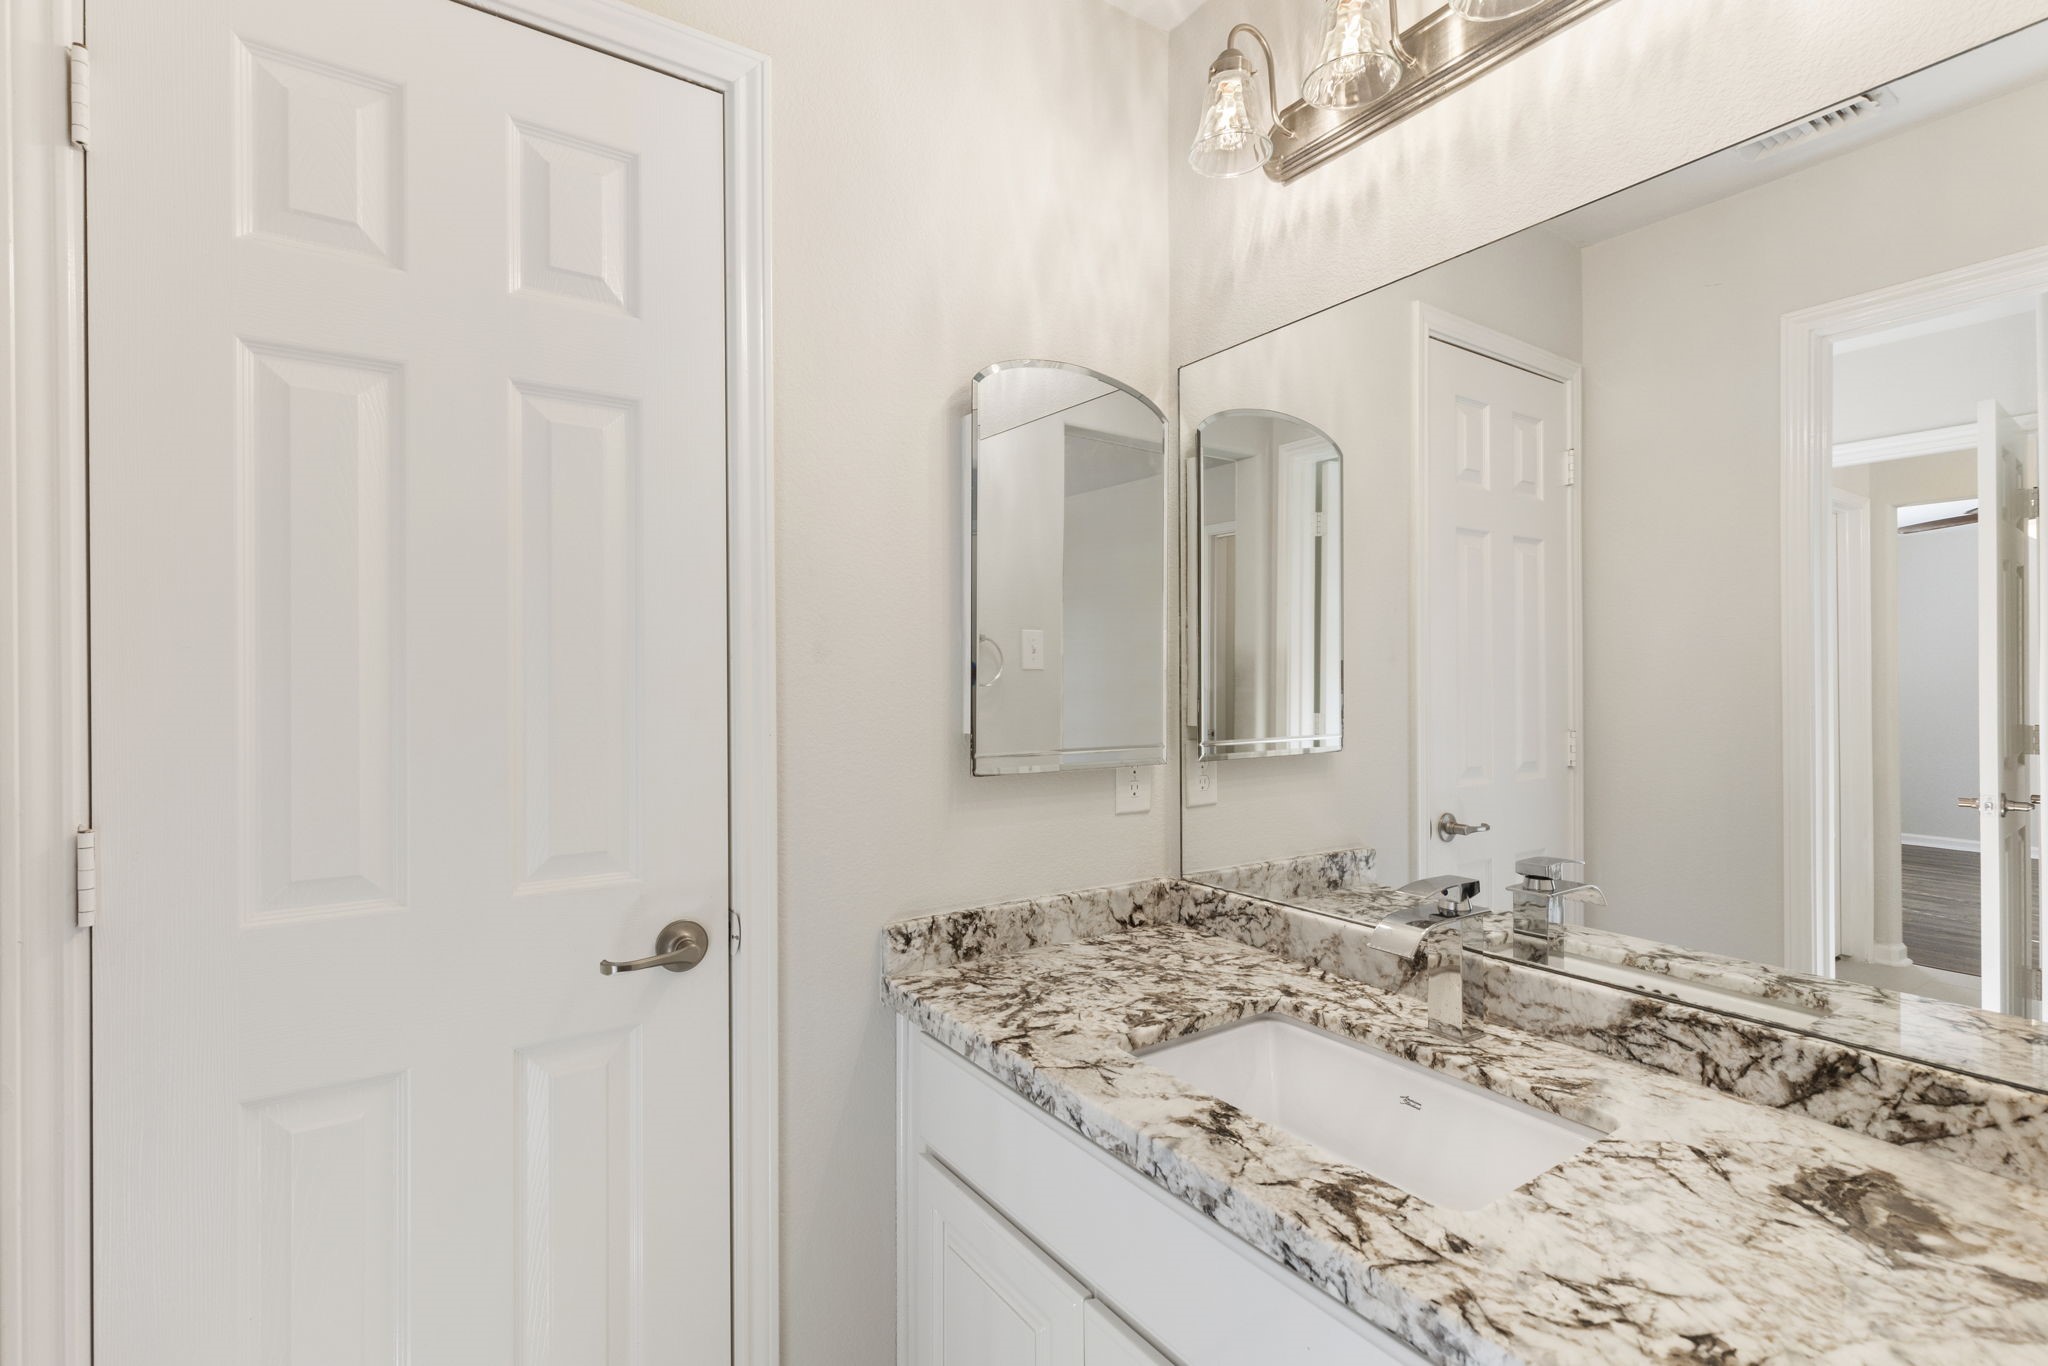 The other secondary bedroom's jack and jill bath has coordinating granite counters and updated lighting and plumbing fixtures.